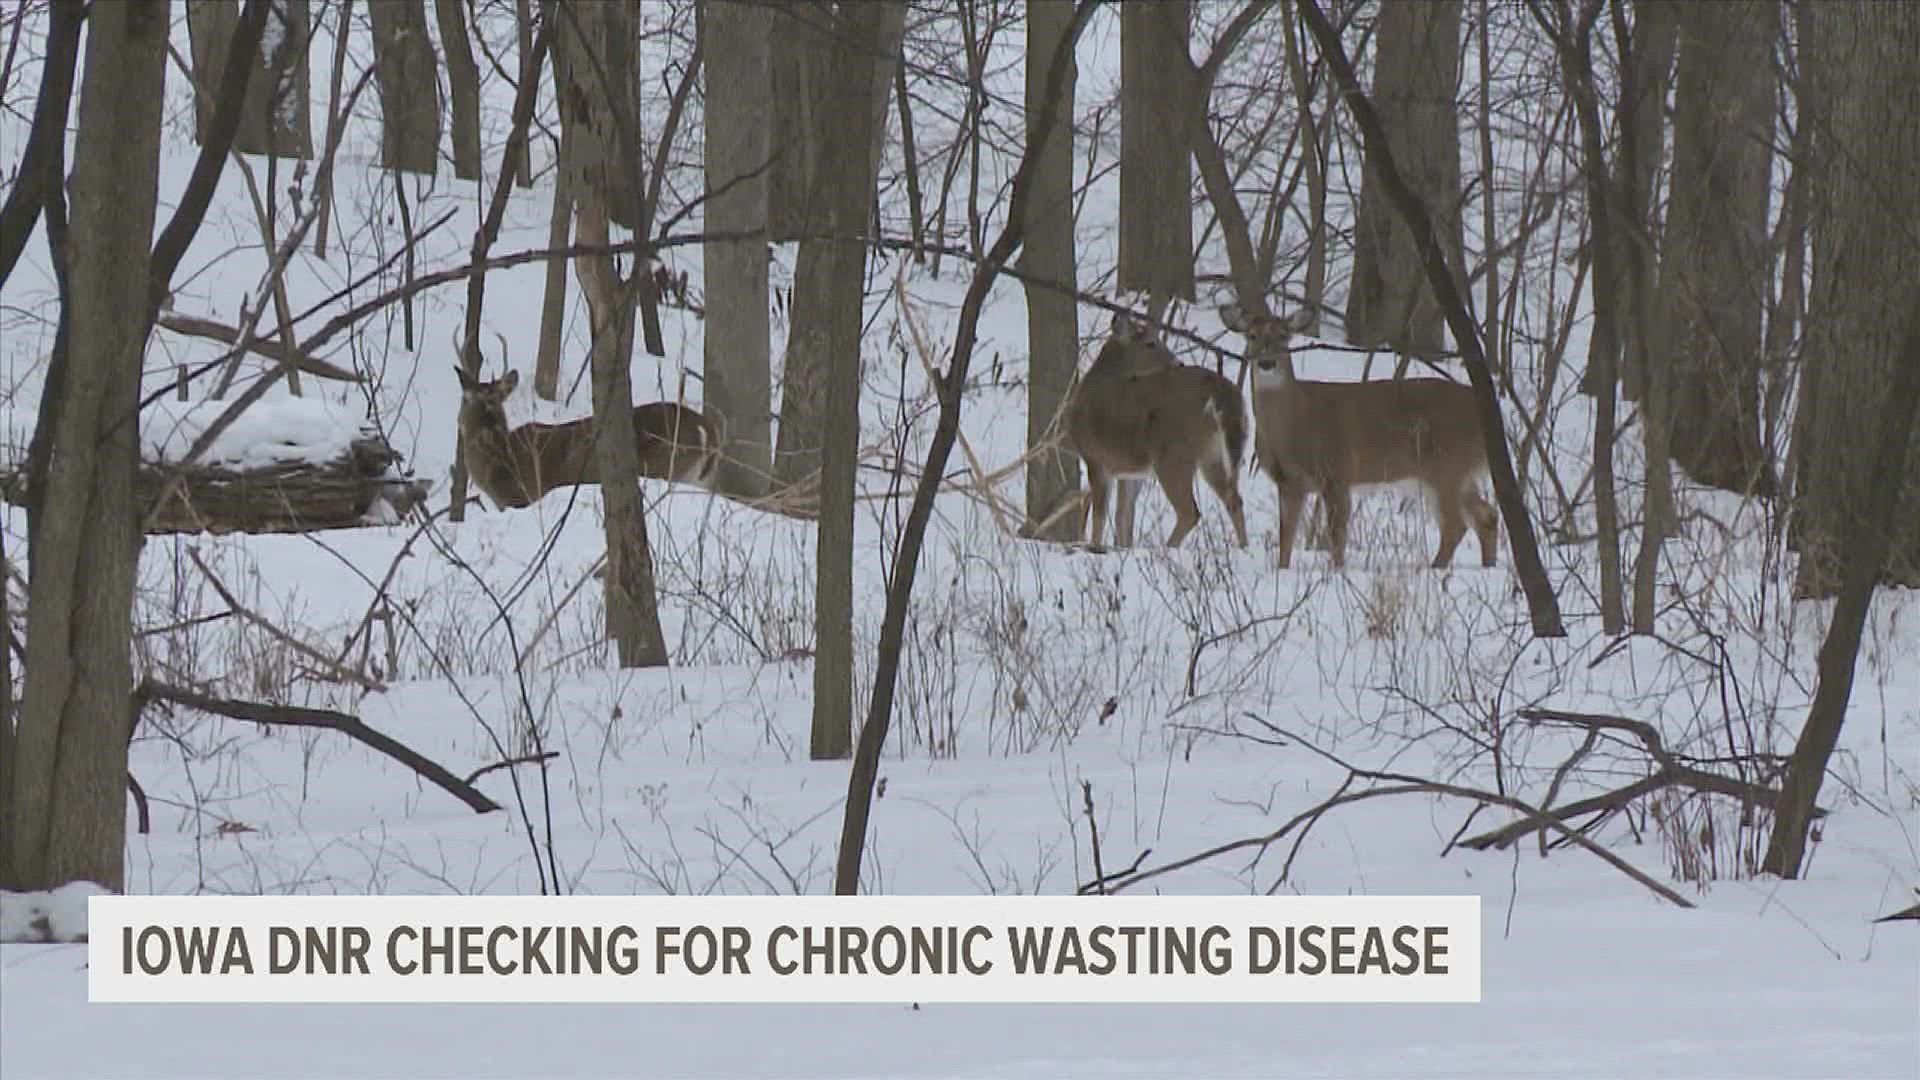 The Iowa Department of Natural Resources is increasing testing for the disease after a deer in Wayne County tested positive for the disease earlier this year.